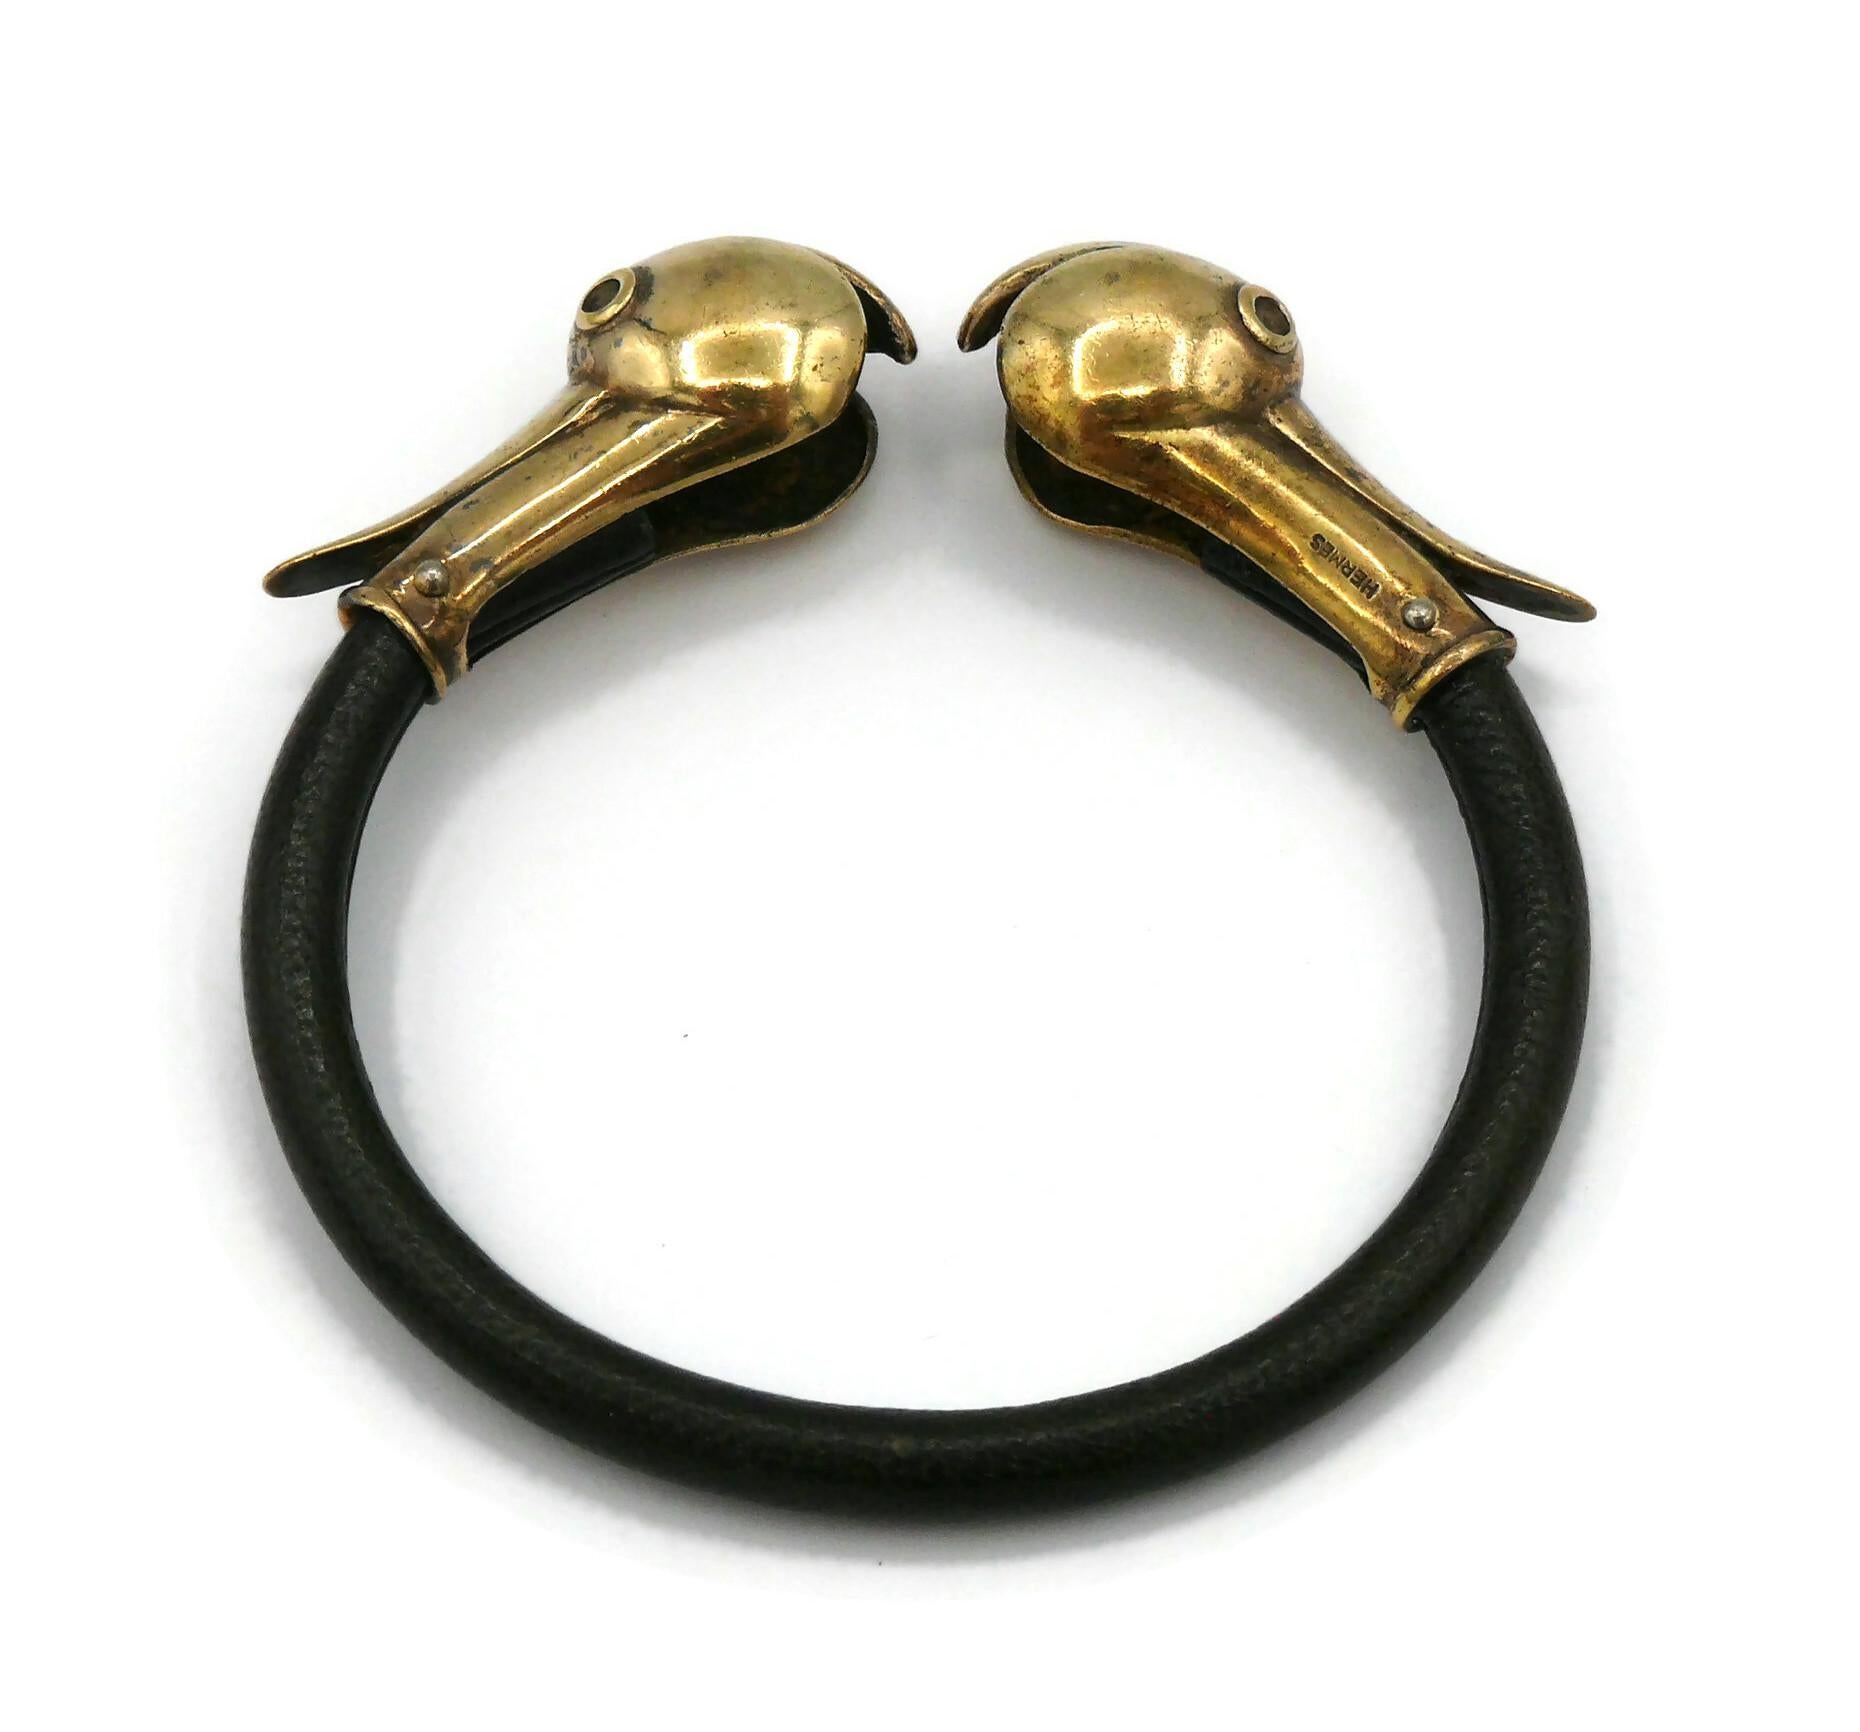 HERMES vintage uber rare dark brown leather bangle bracelet featuring two duck heads made of vermeil.

Slips on (no closure system).

Embossed HERMES (on each duck head).
French silver crab hallmark.
Silversmith's hallmark.

Indicative measurements